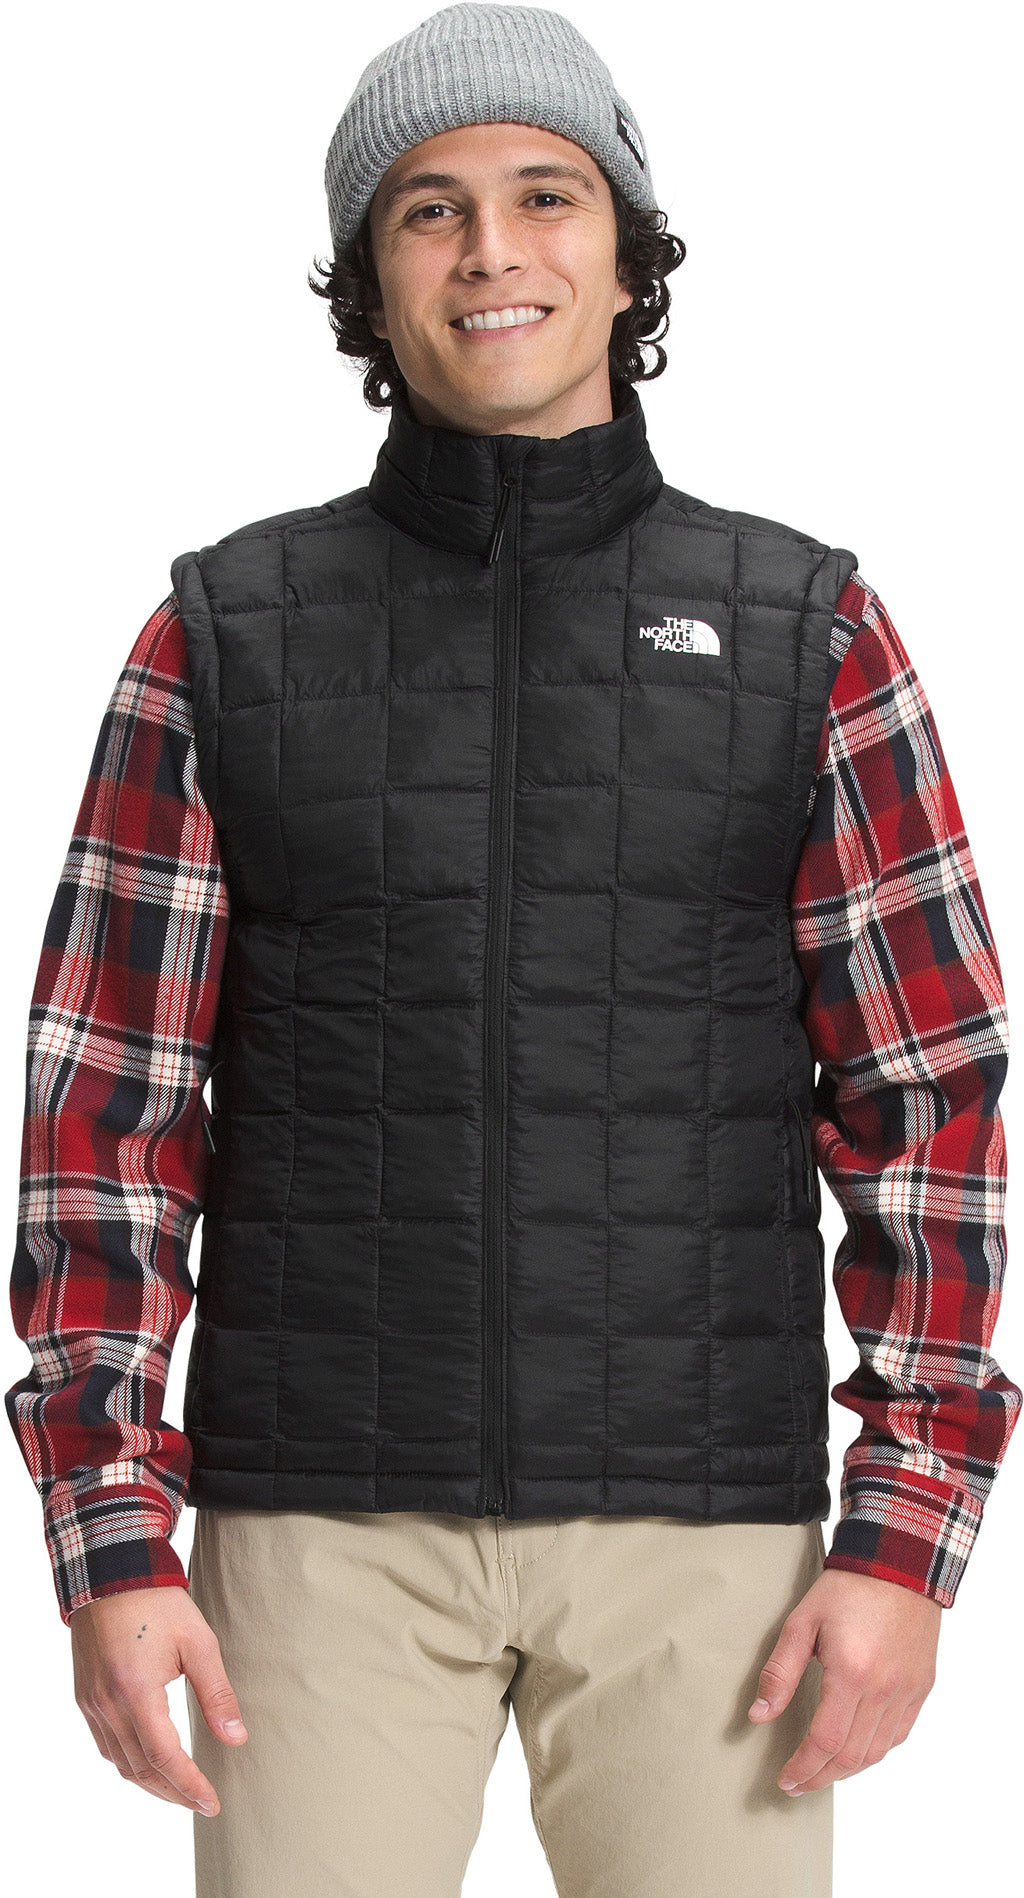 gilet the north face homme